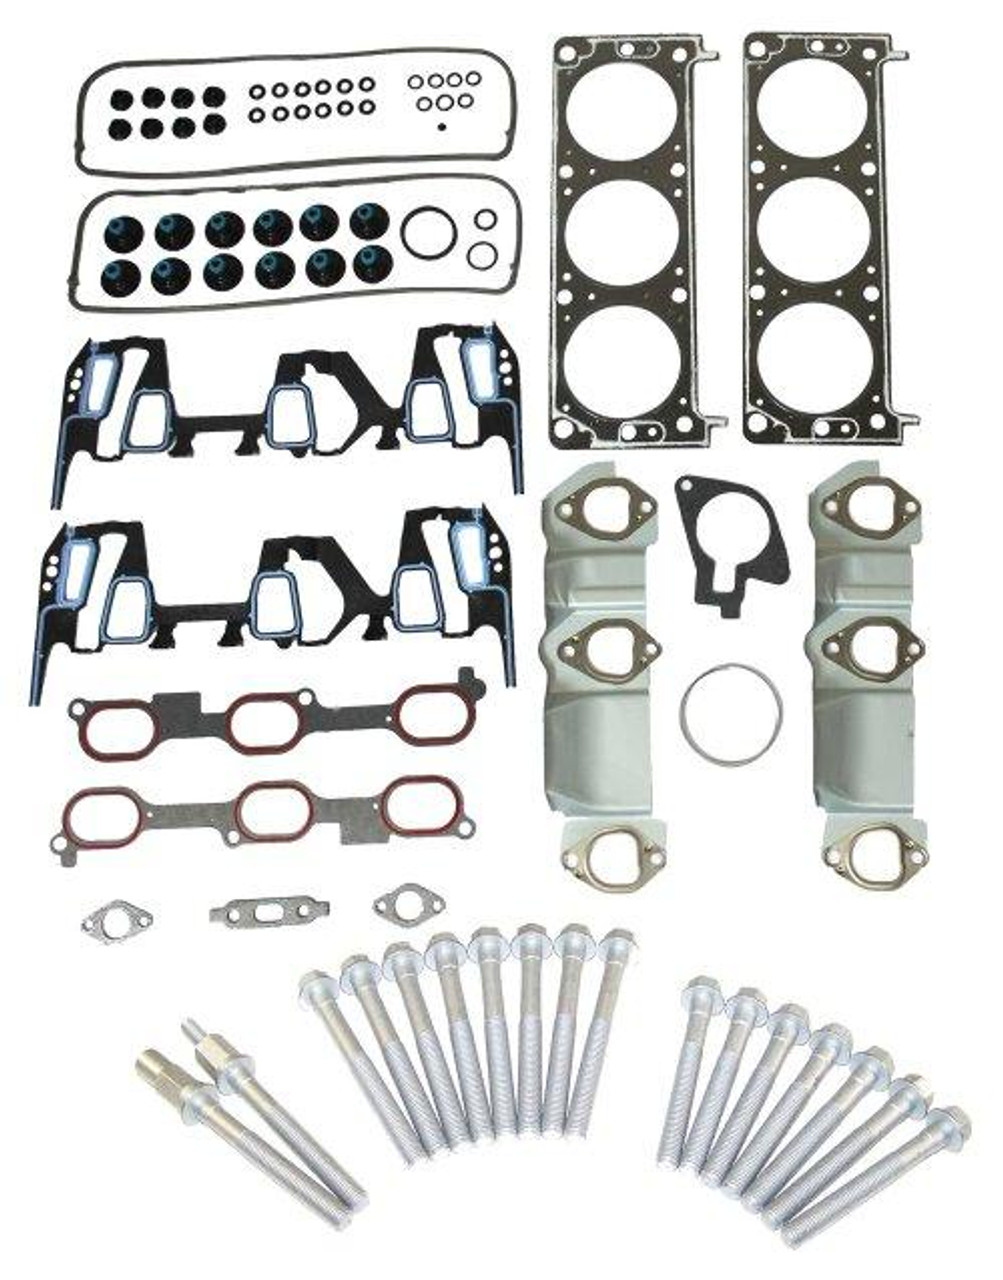 Head Gasket Set with Head Bolt Kit - 2002 Oldsmobile Silhouette 3.4L Engine Parts # HGB31181ZE13